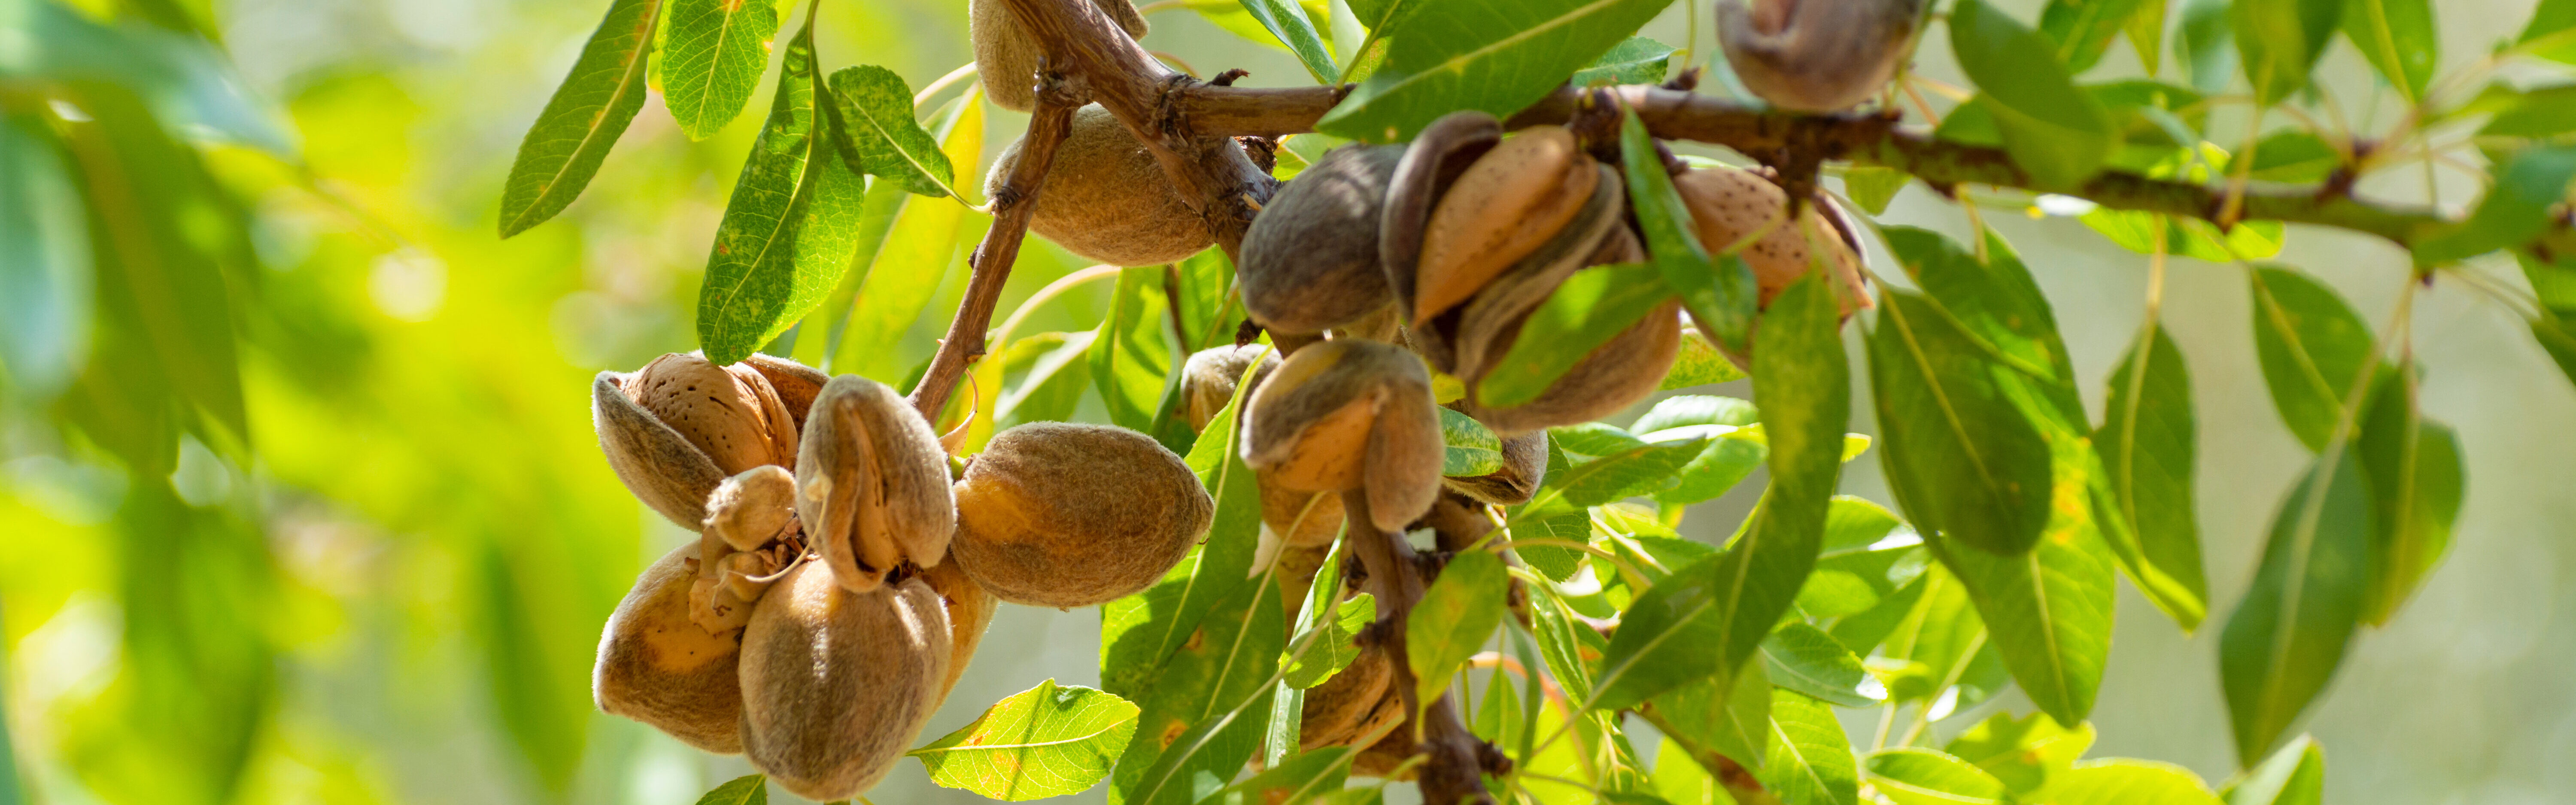 Almonds ready for harvest against green leaves